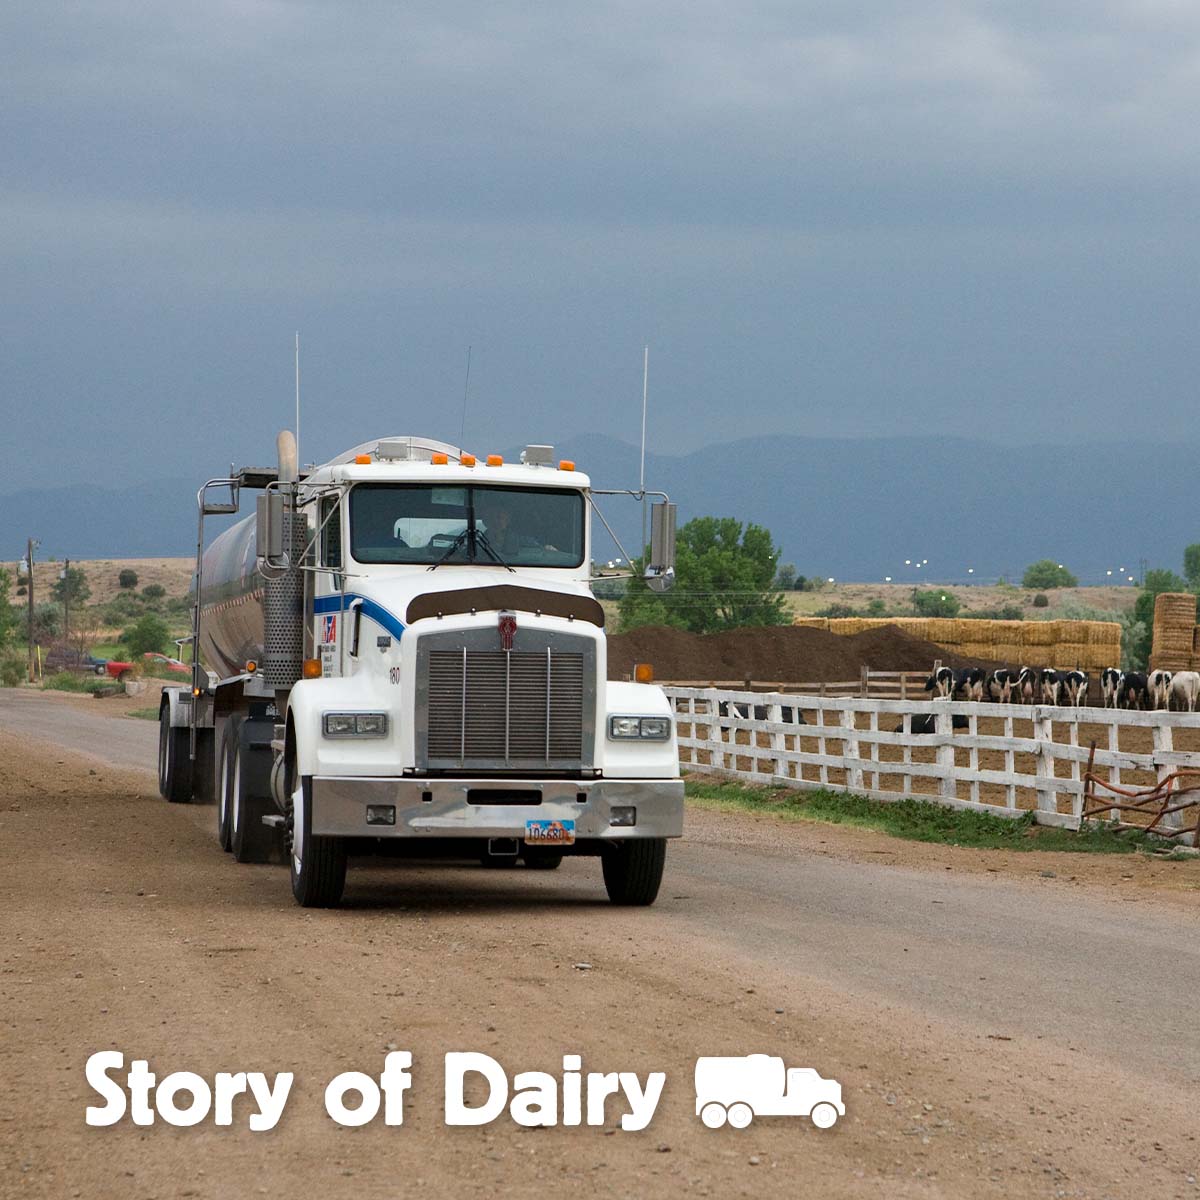 The Story of Dairy: Transporting Milk